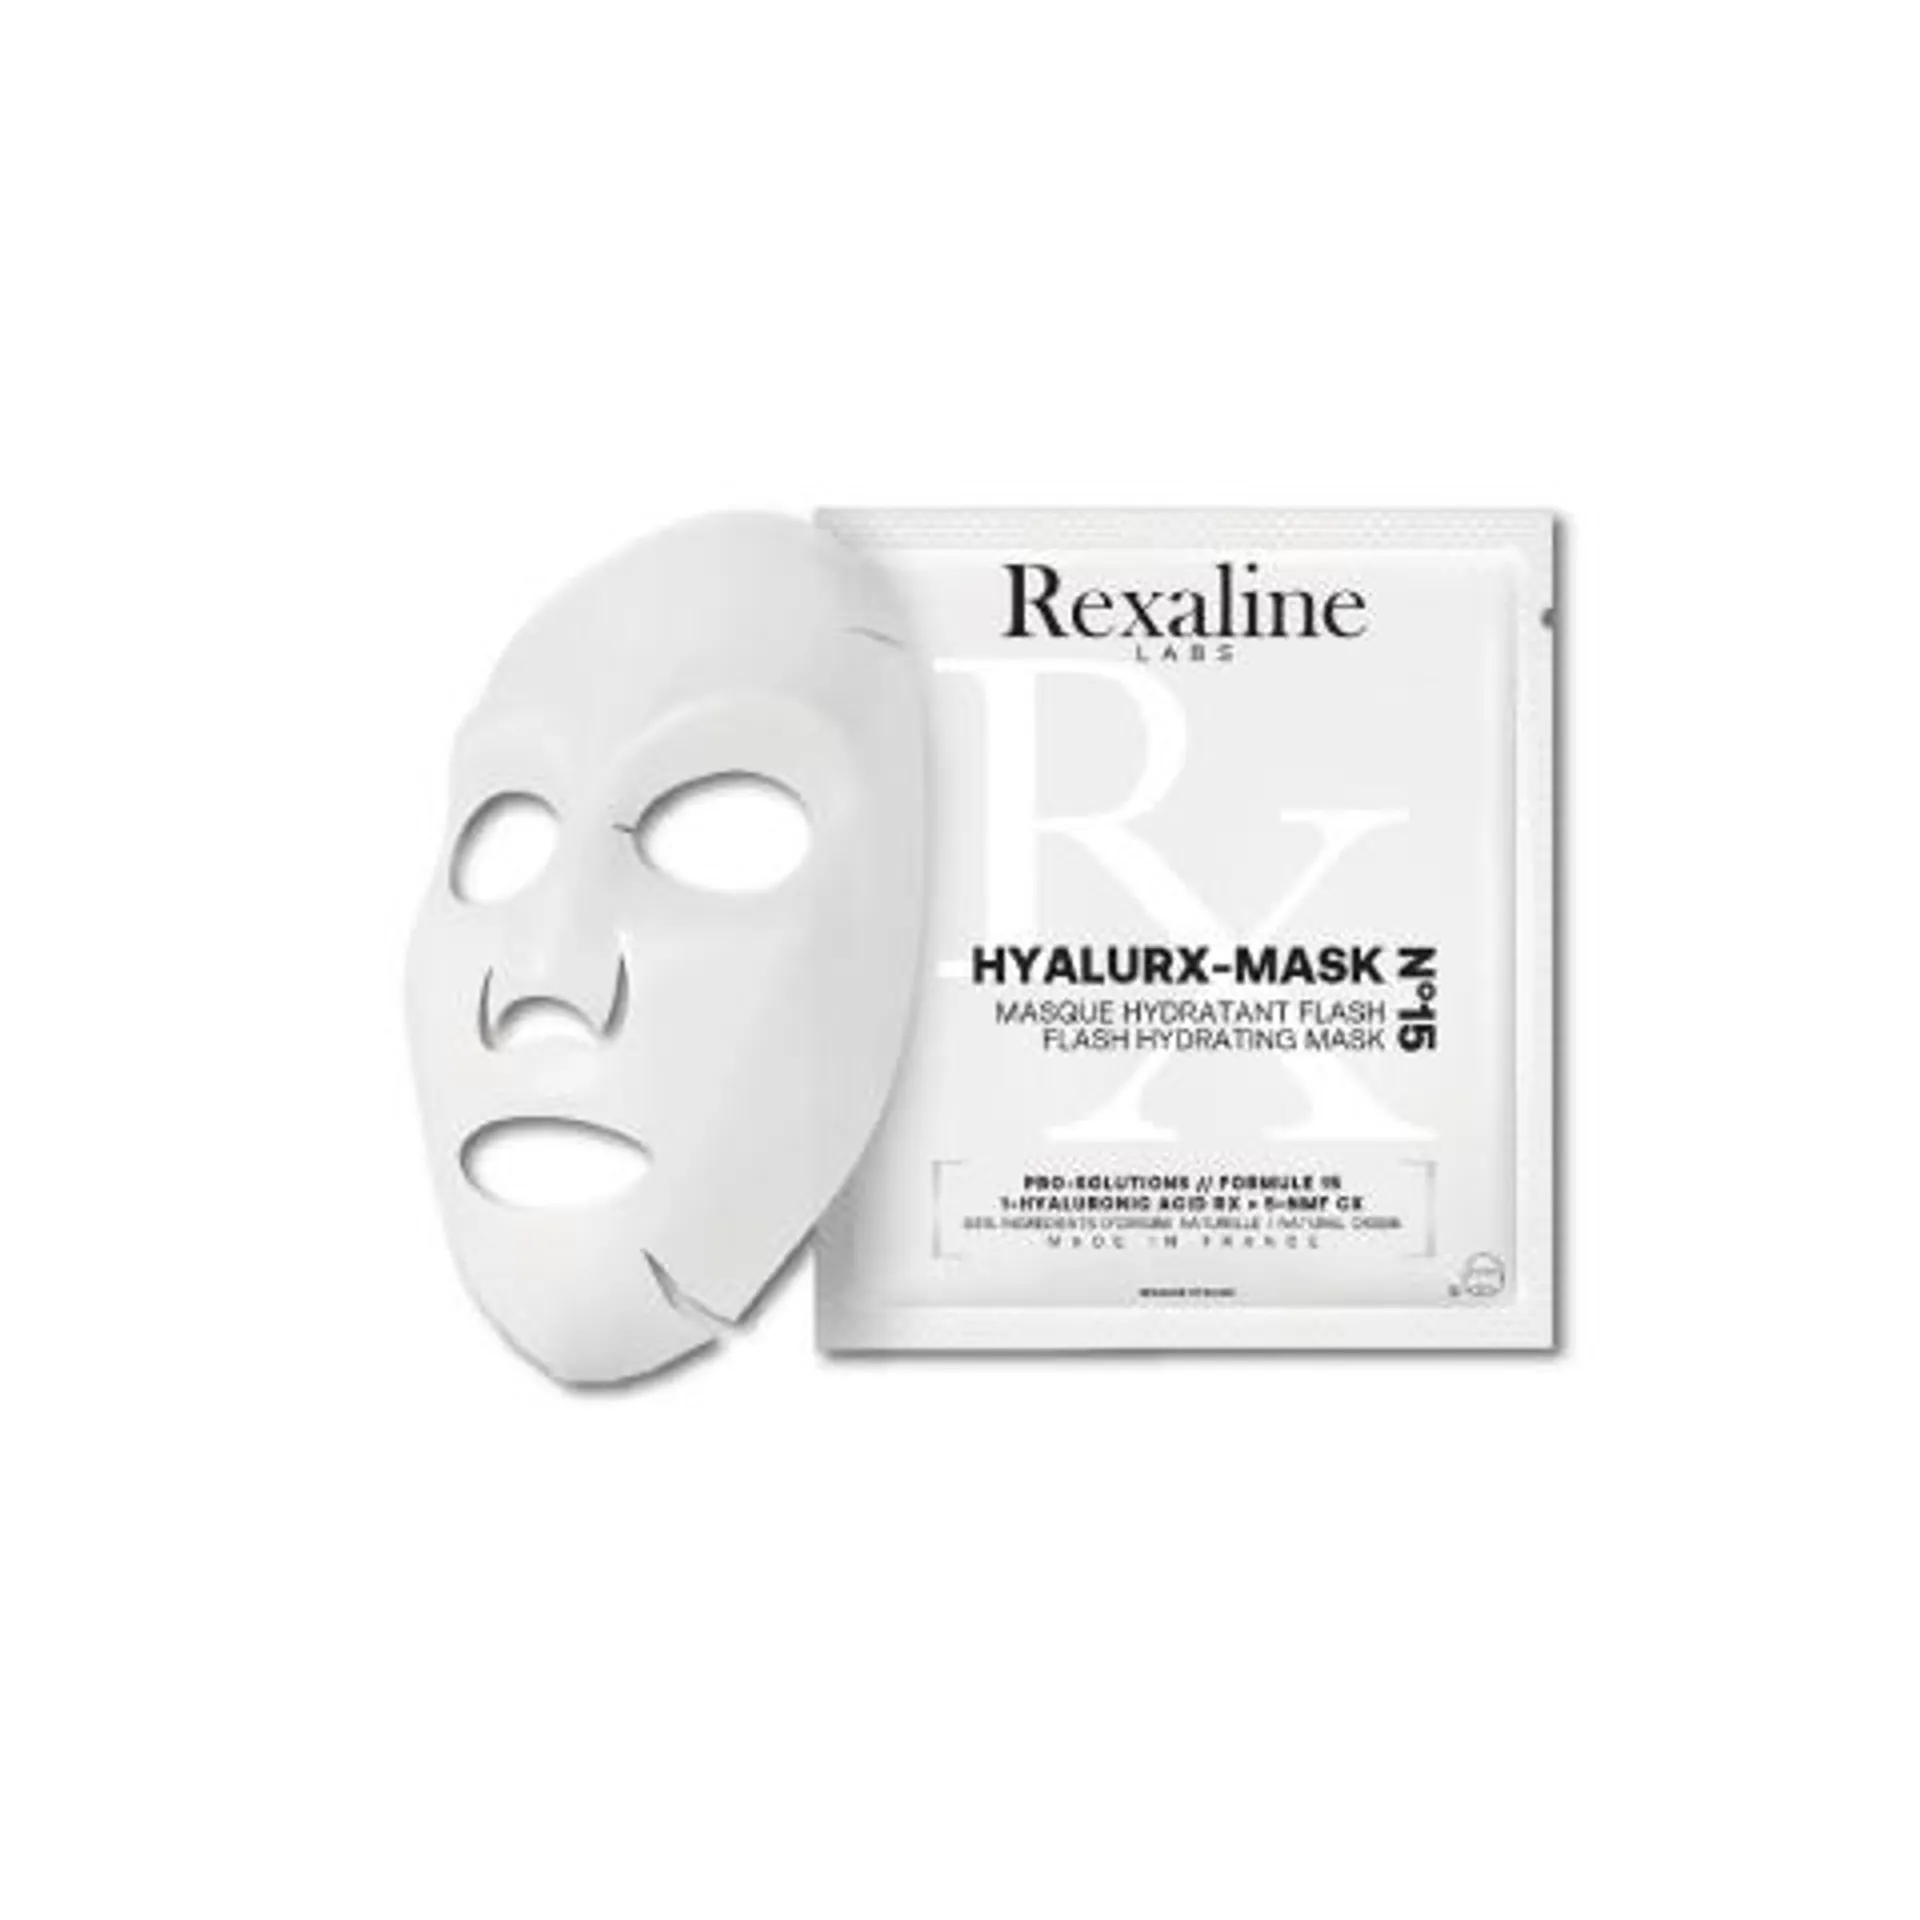 HYALURX-Mask Pro-Solutions N°15